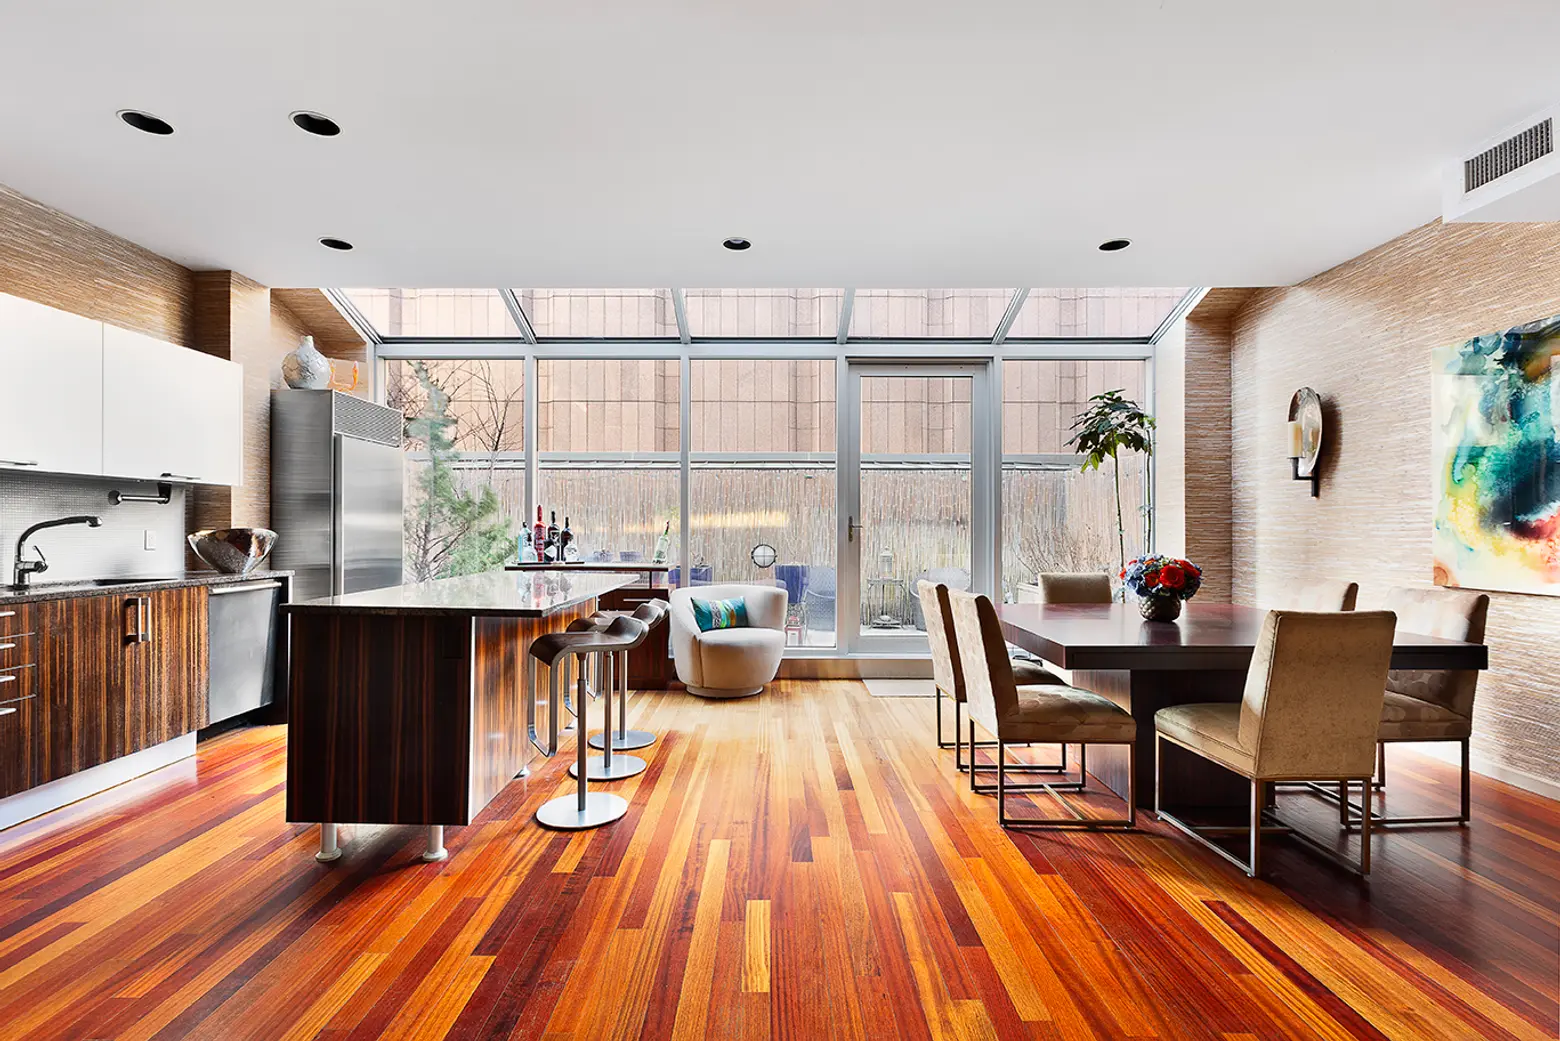 Practice your putting at this $3.65M Tribeca penthouse, featuring three outdoor spaces